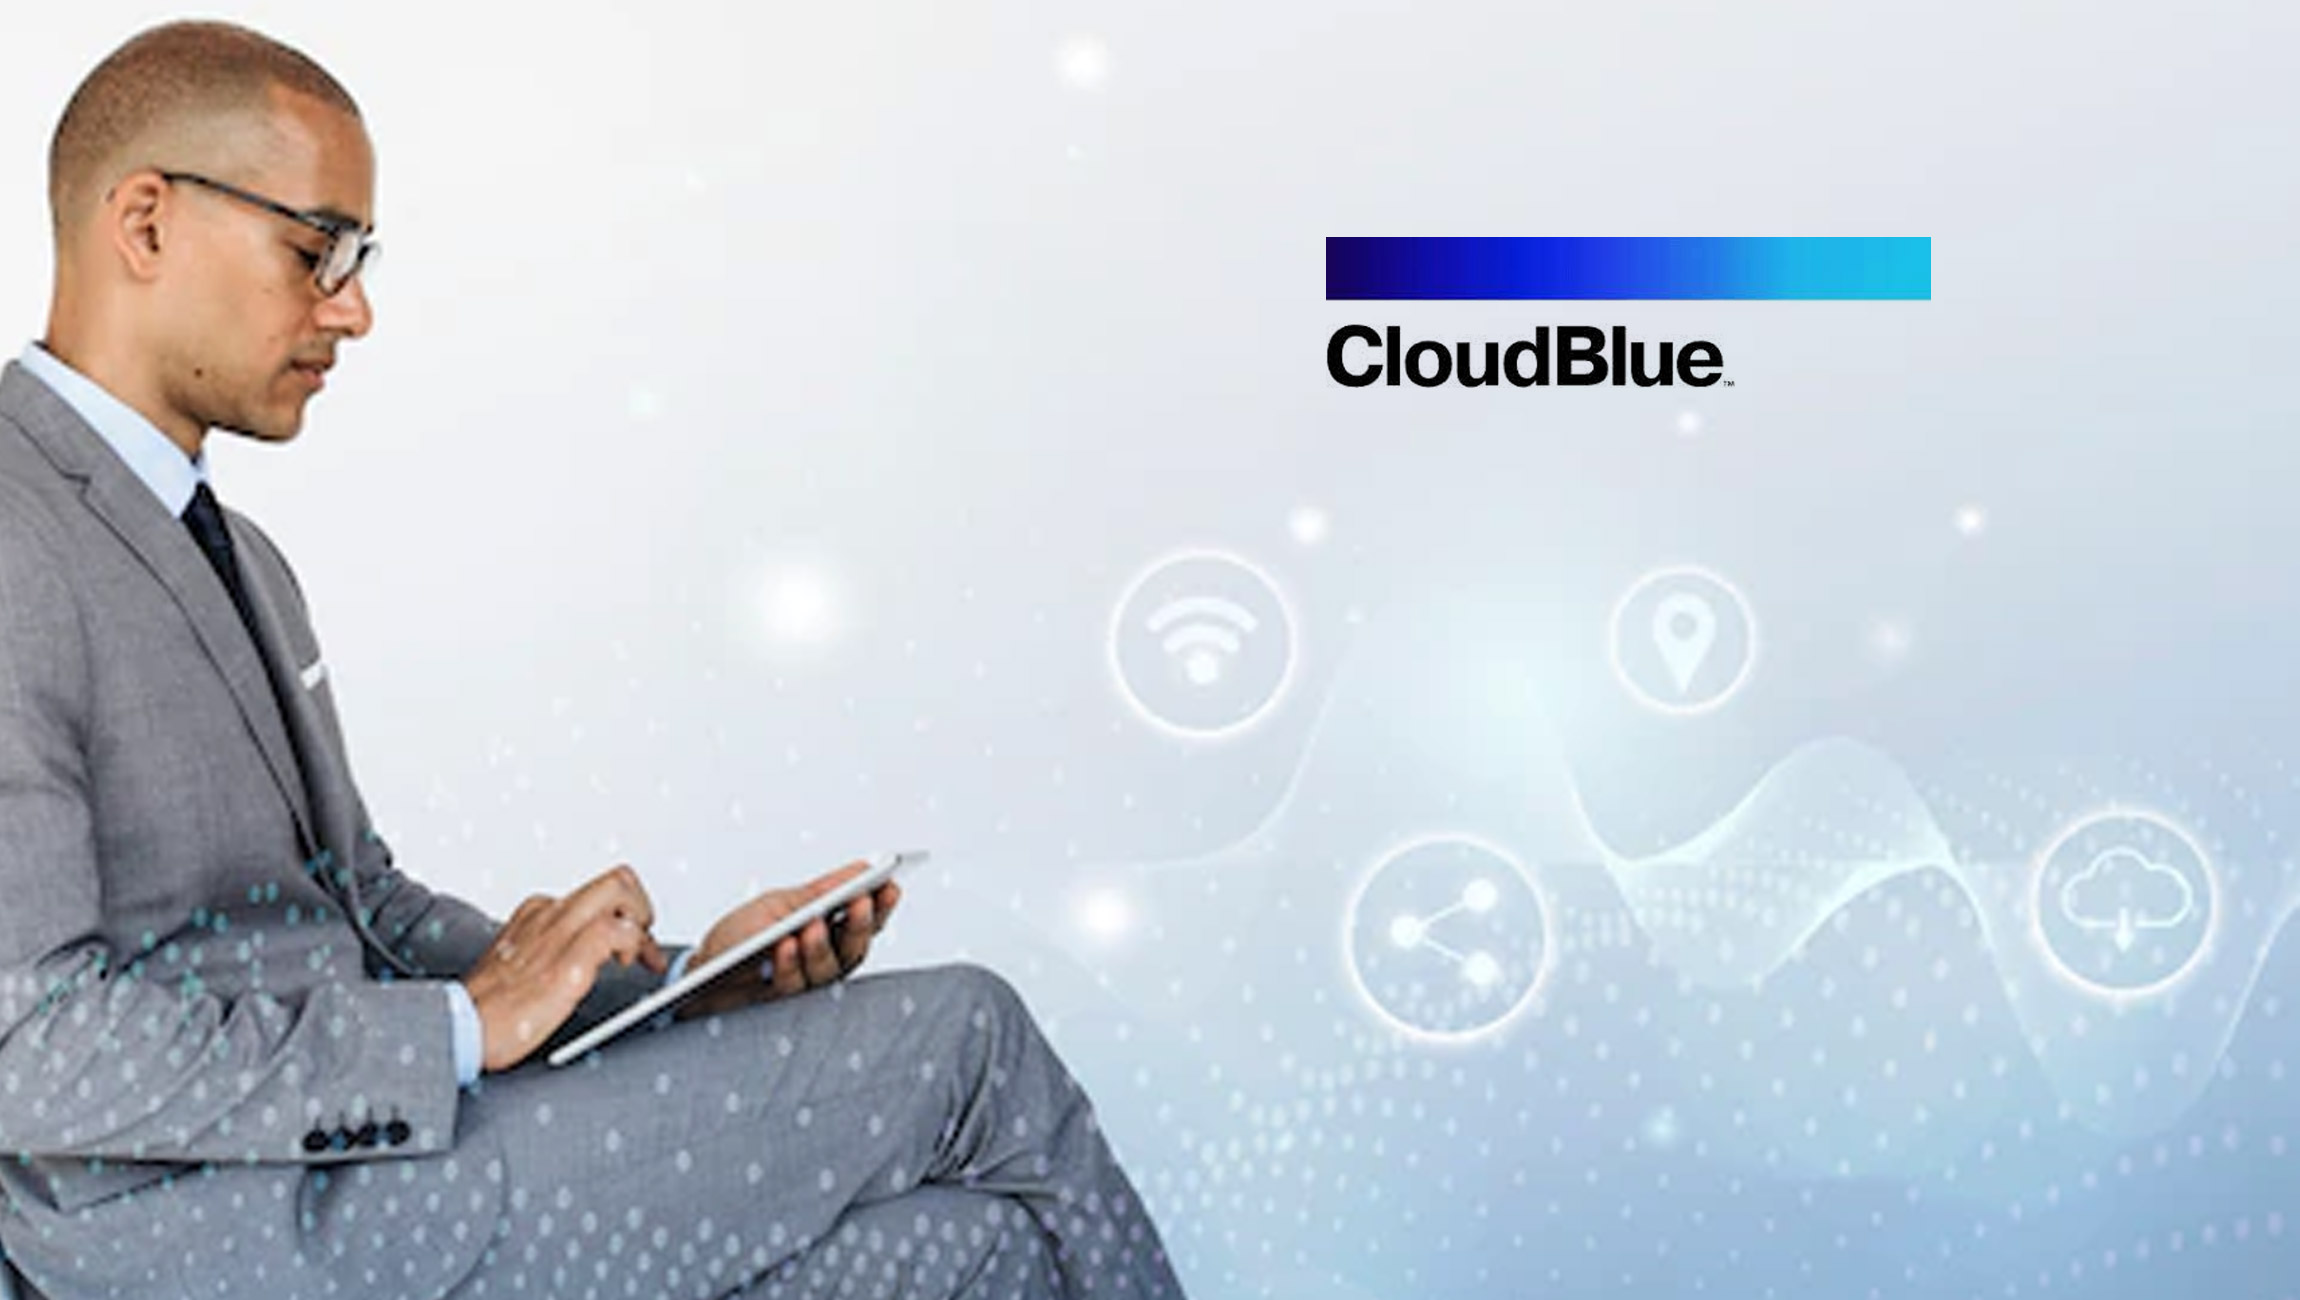 New Agreement Between CloudBlue and Wanget Inc. Marks a Milestone for Subscription Economy Adoption in Japan